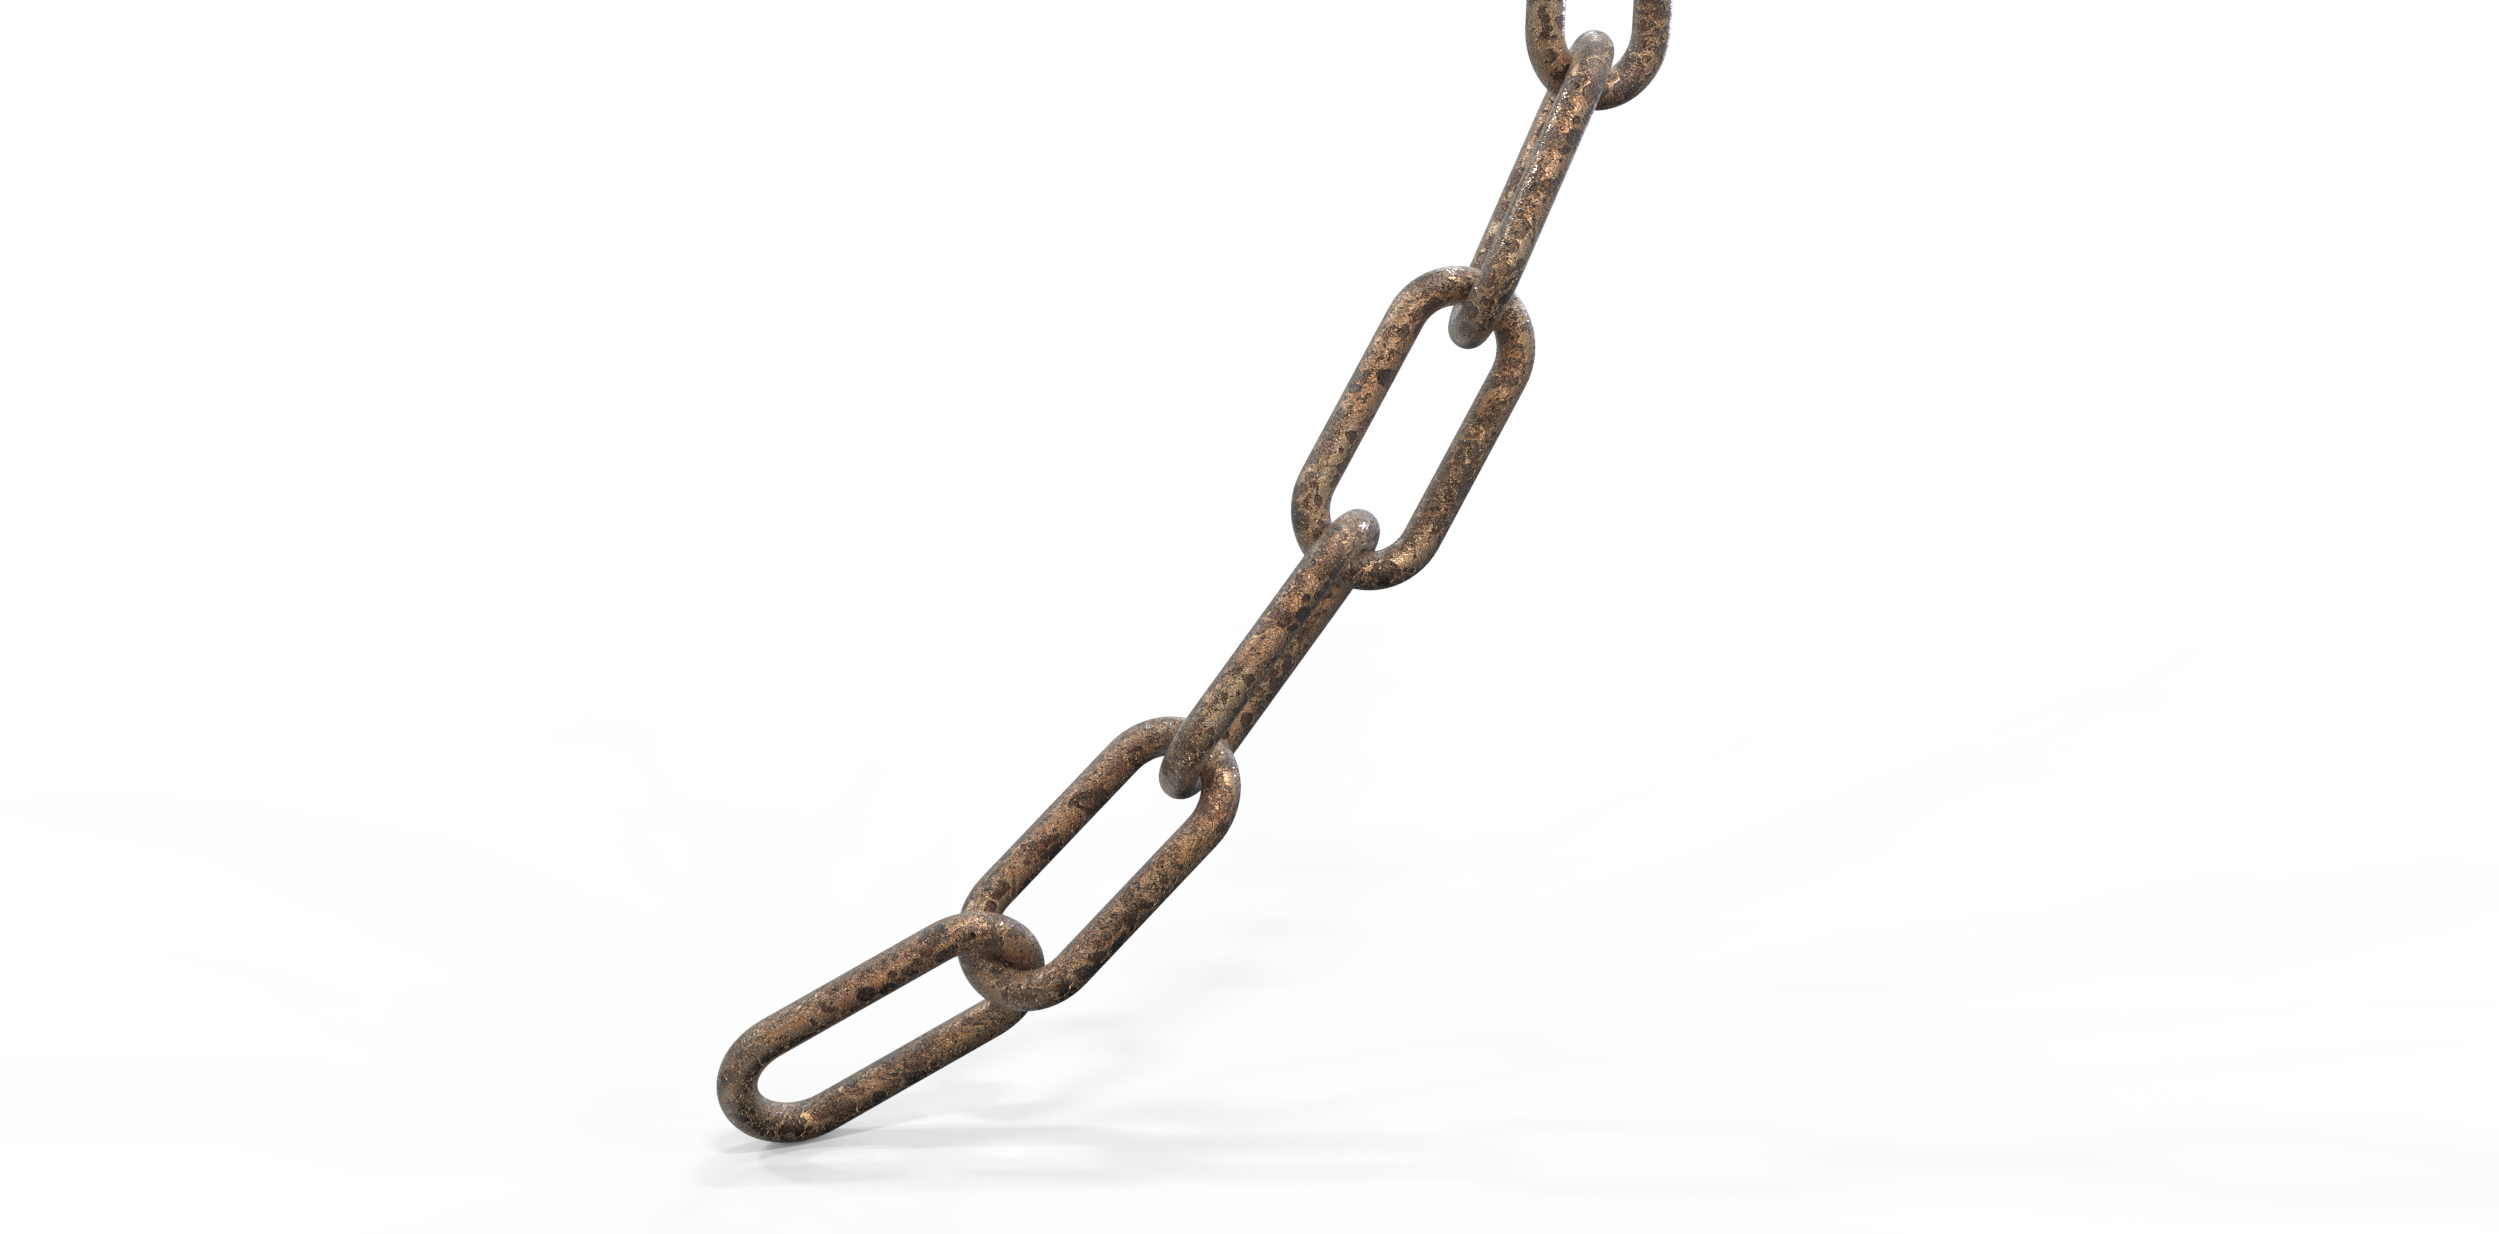 Download Animated Chain Link HQ PNG Image | FreePNGImg